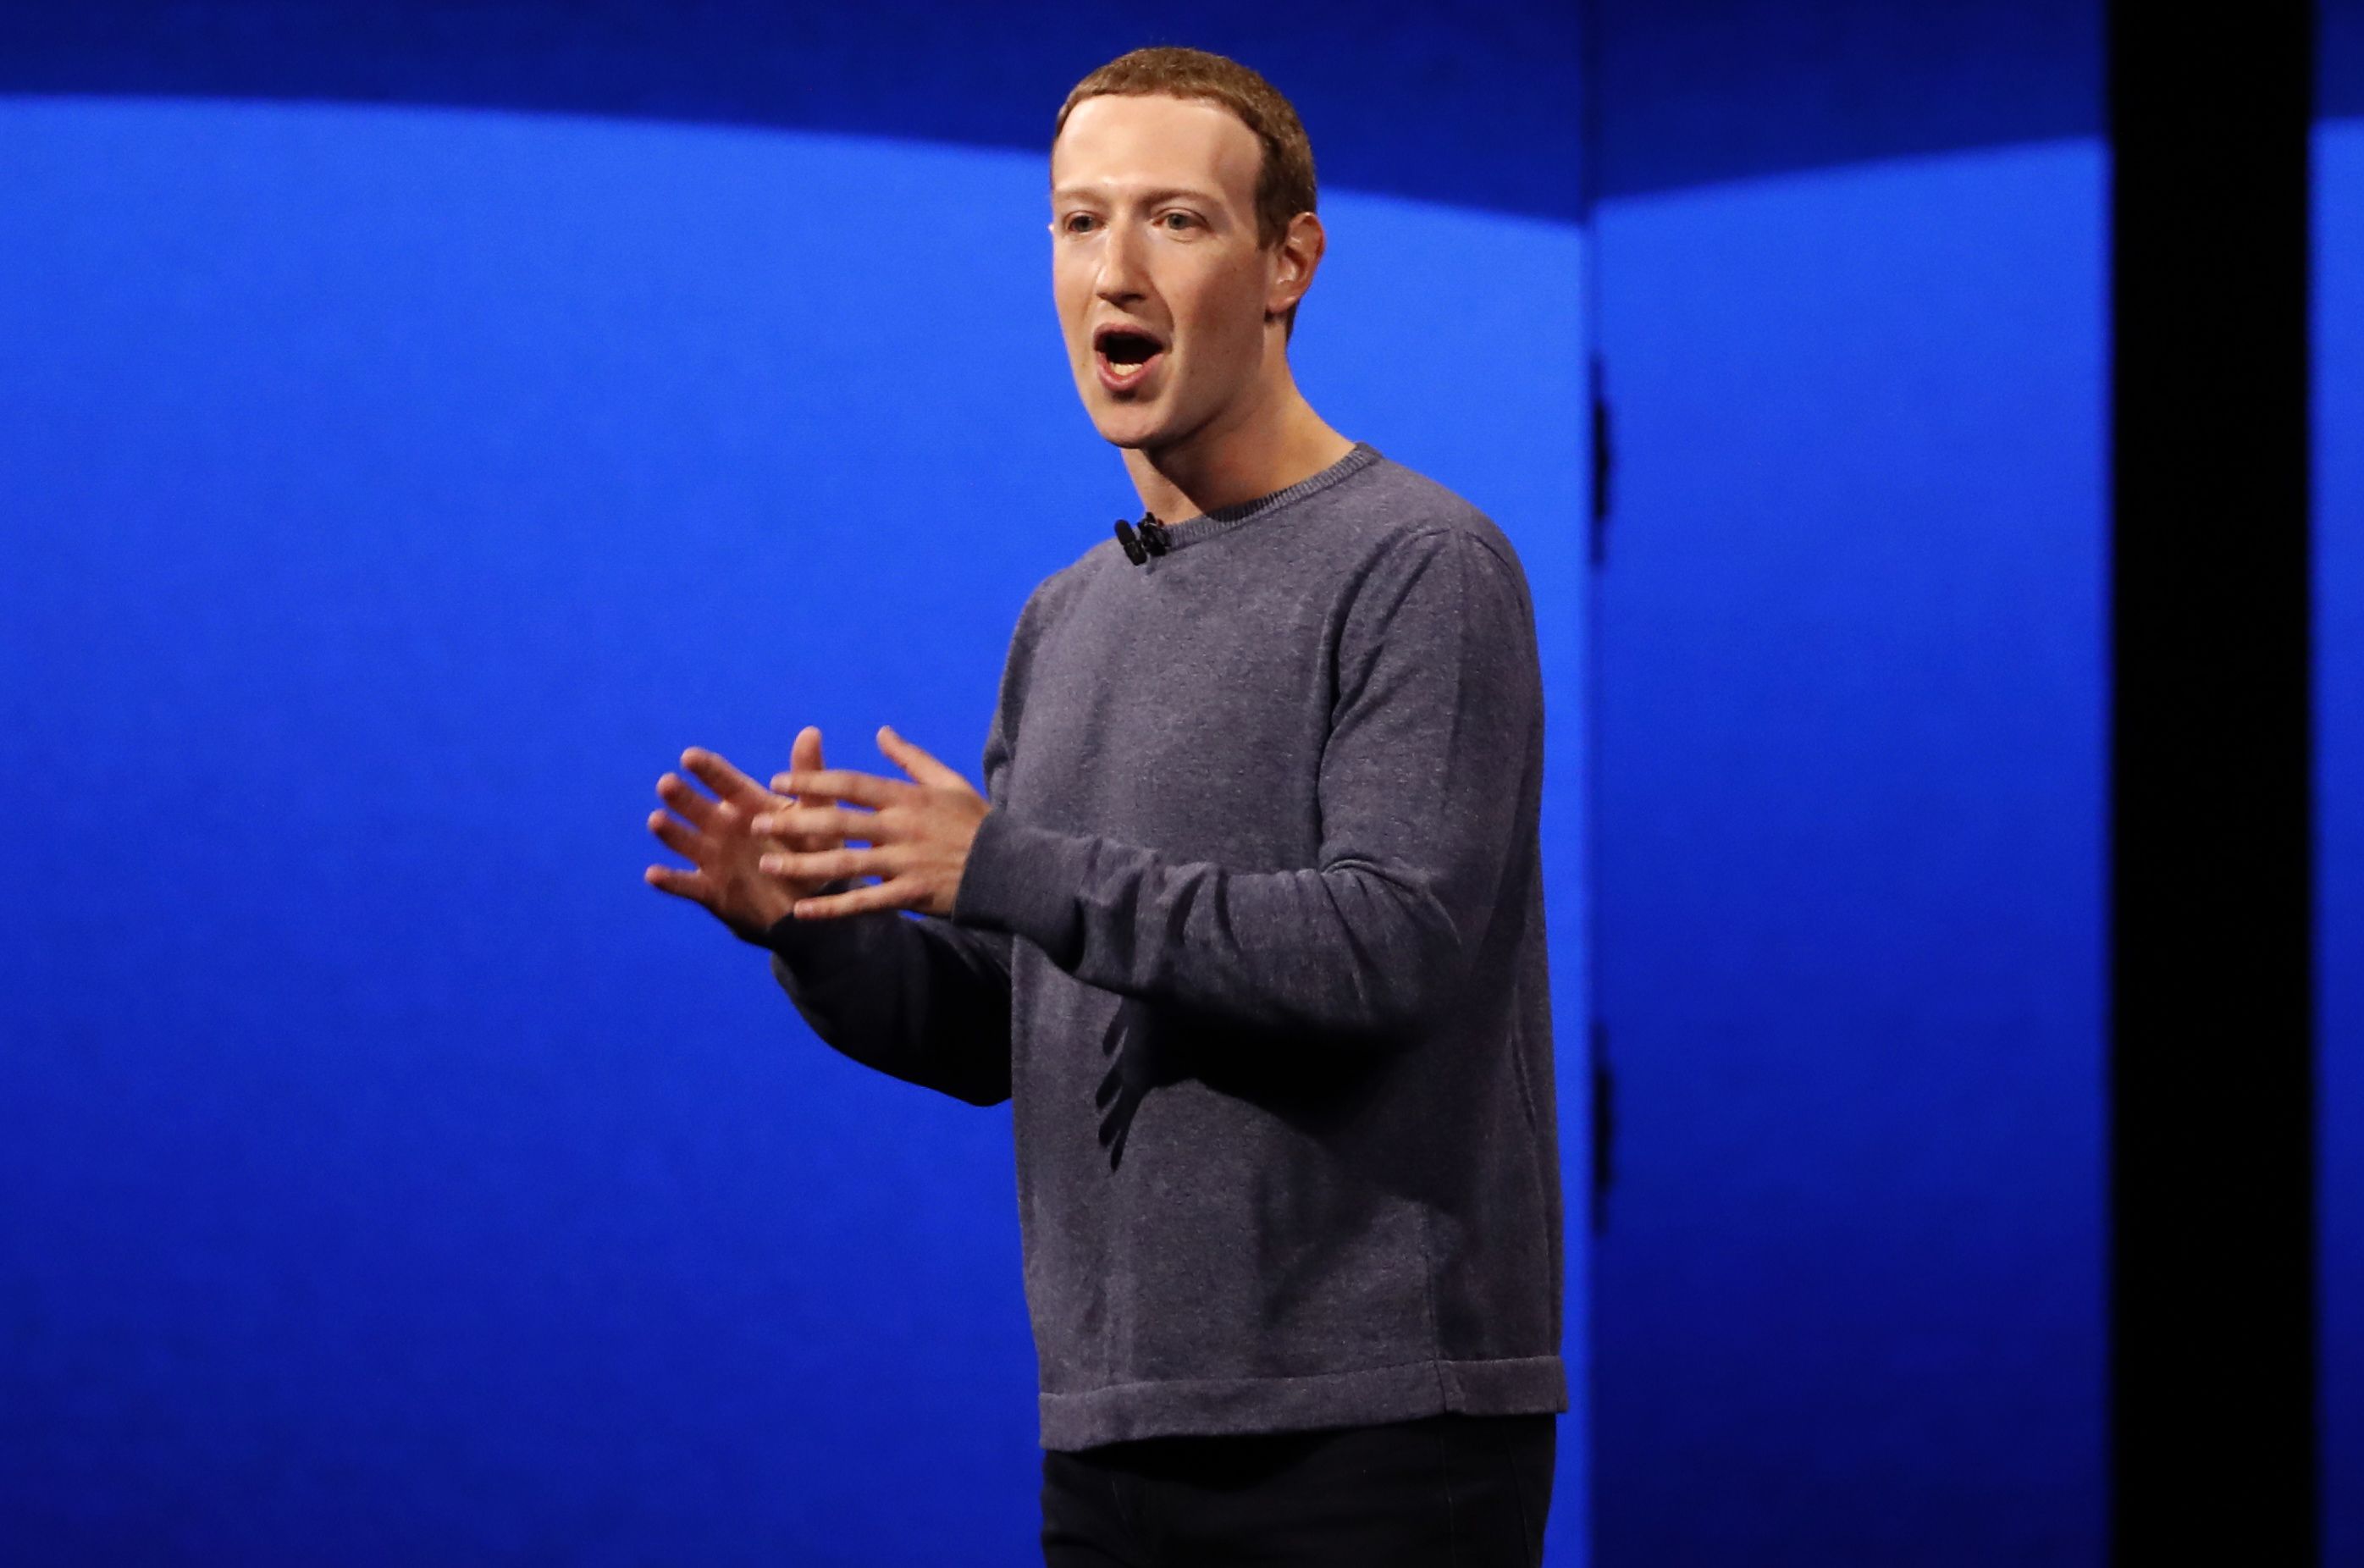 Zuckerberg teases Facebook voice assistant products